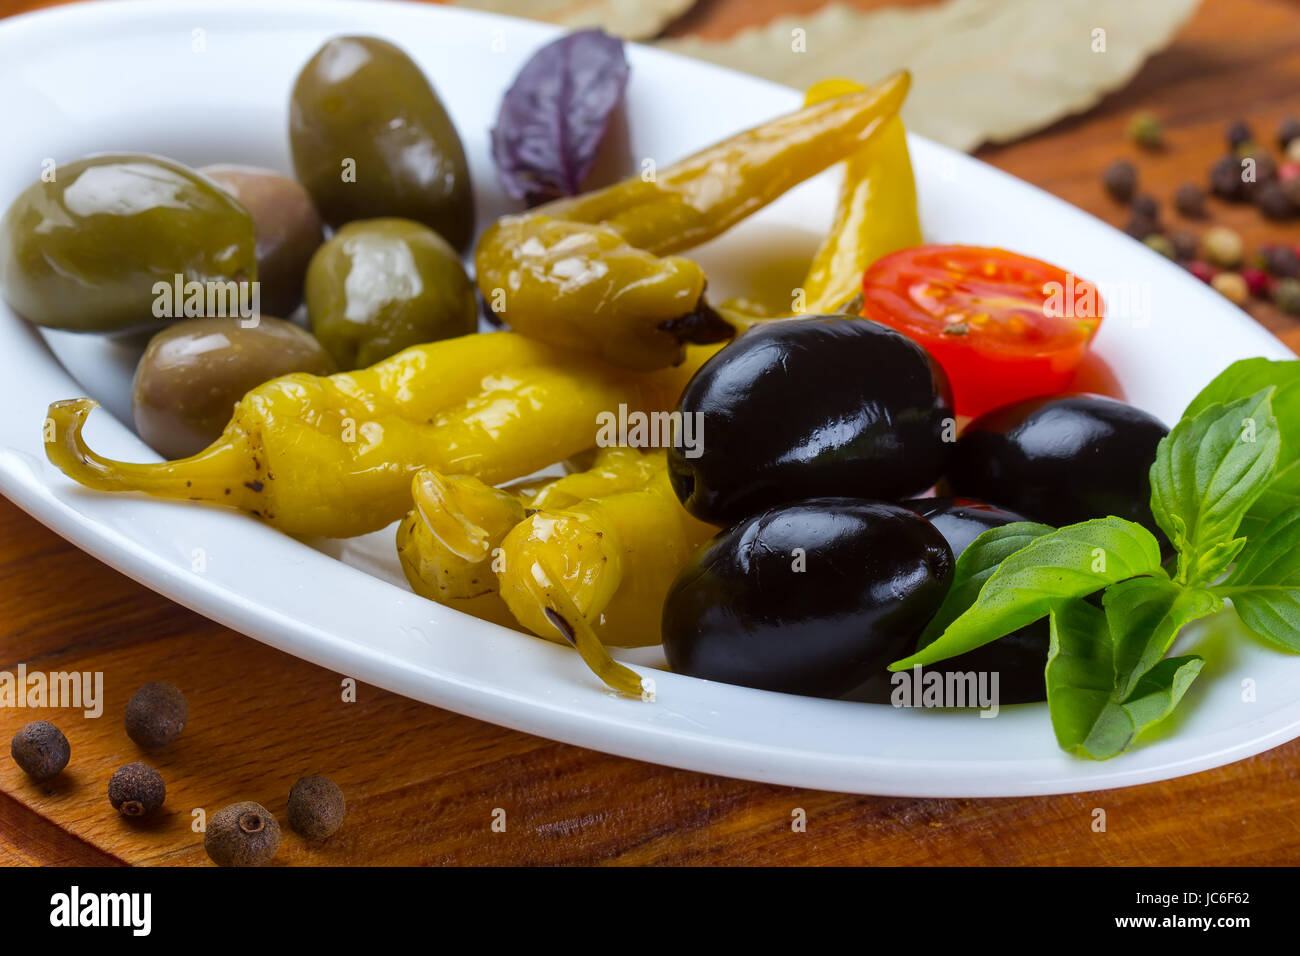 Plate with grilled pepper, assorted olives and spices Stock Photo